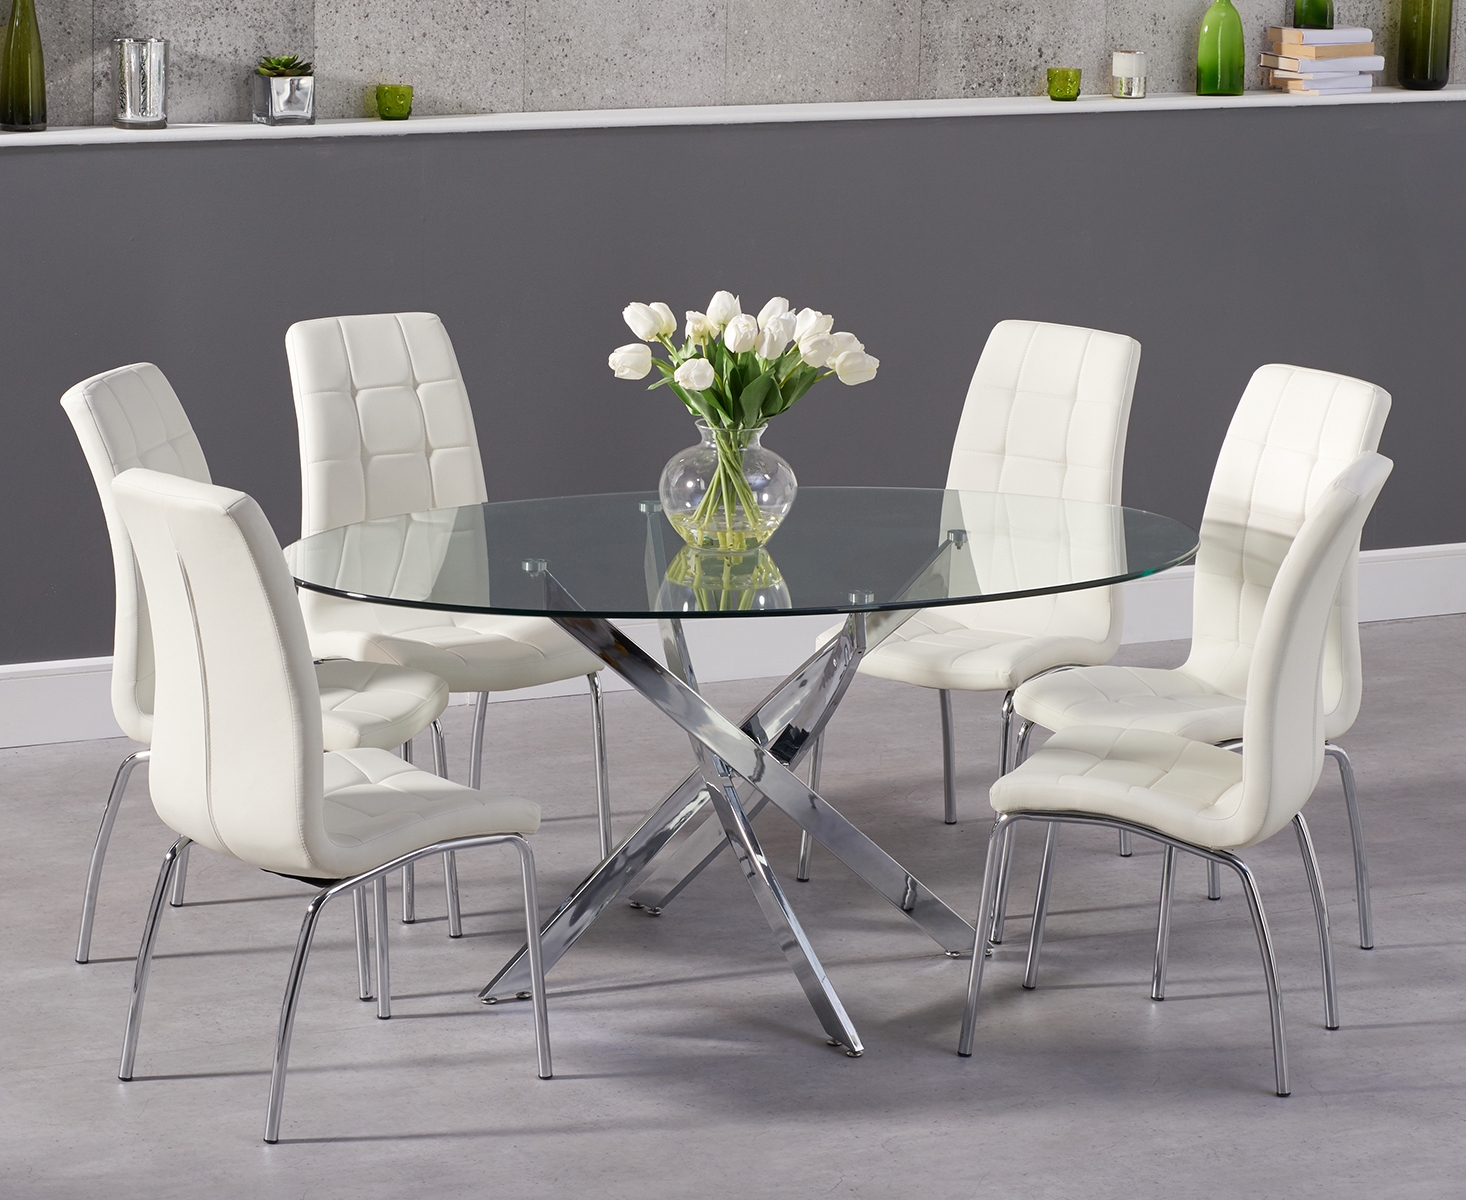 Denver 165cm Oval Glass Dining Table With 4 Black Enzo Chairs